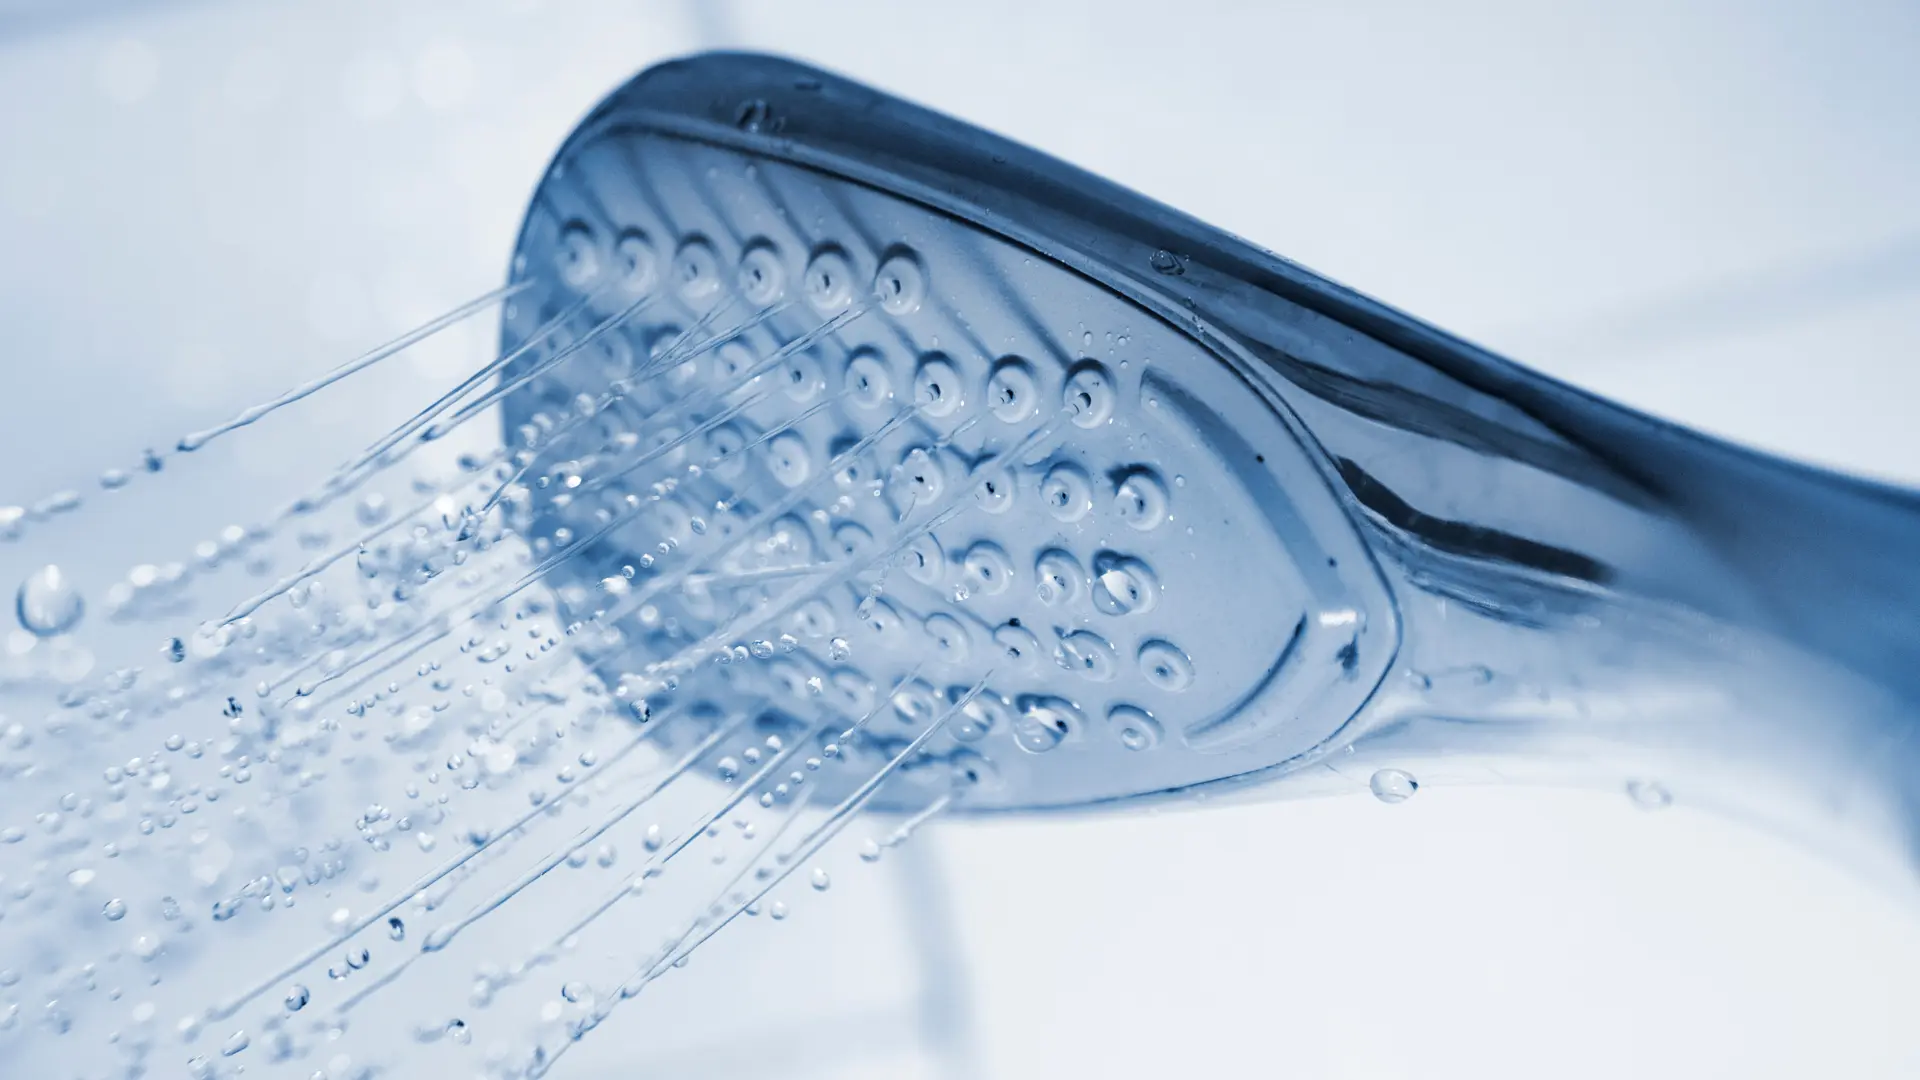 What does it mean when water comes up from the shower drain?